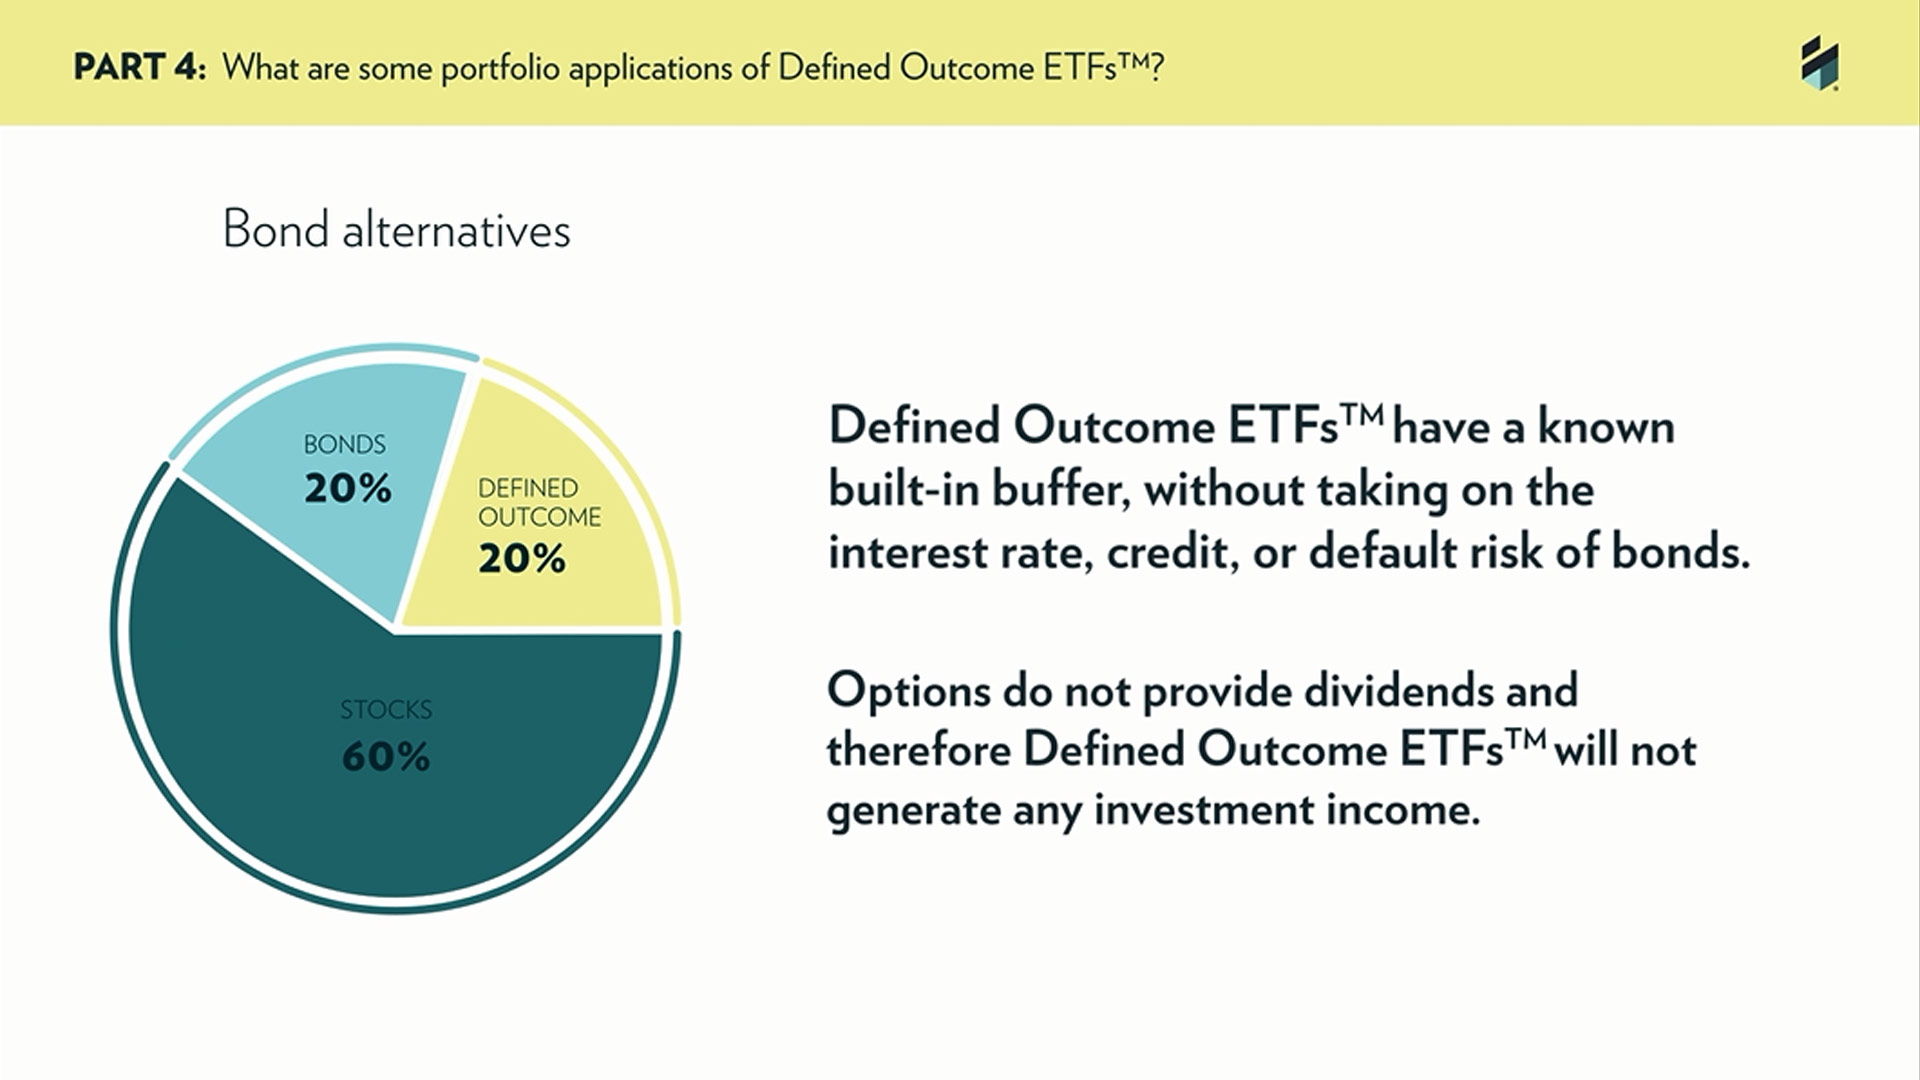 Survivorship bias is one of the clear benefits of ETF investment